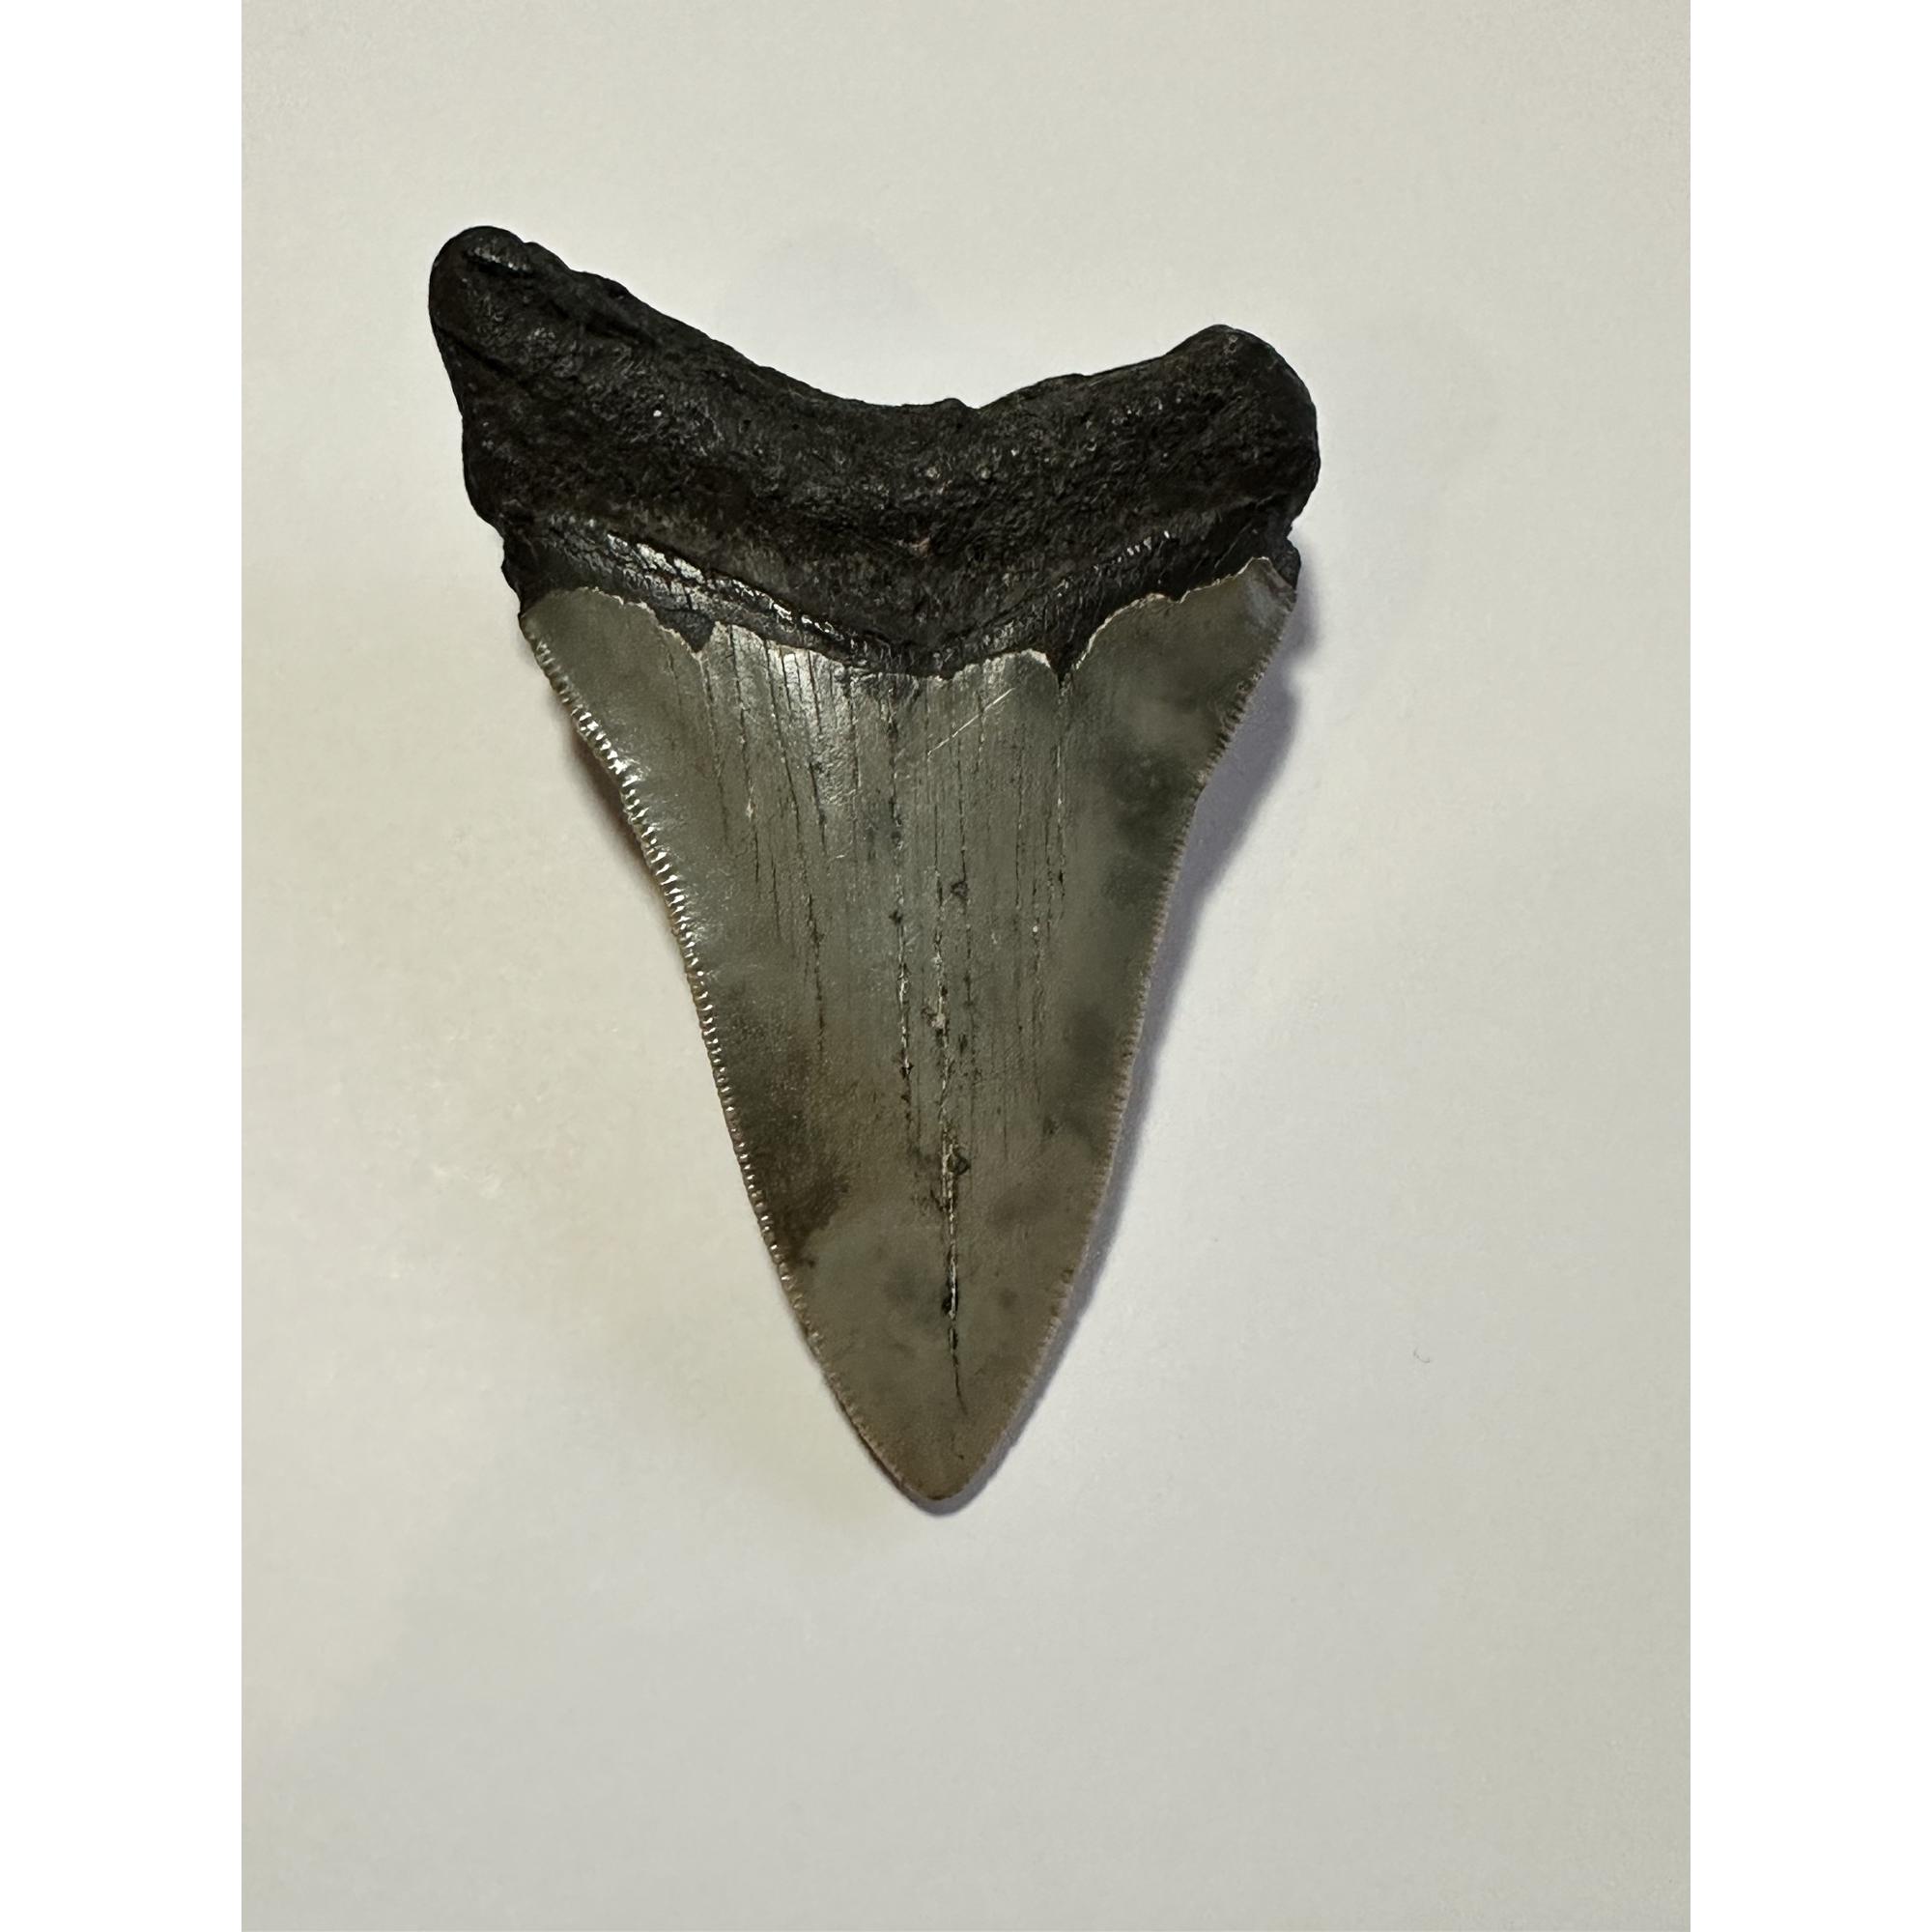 This beautiful megalodon tooth measures 3.40 inches and is heavily serrated with a dark gray color